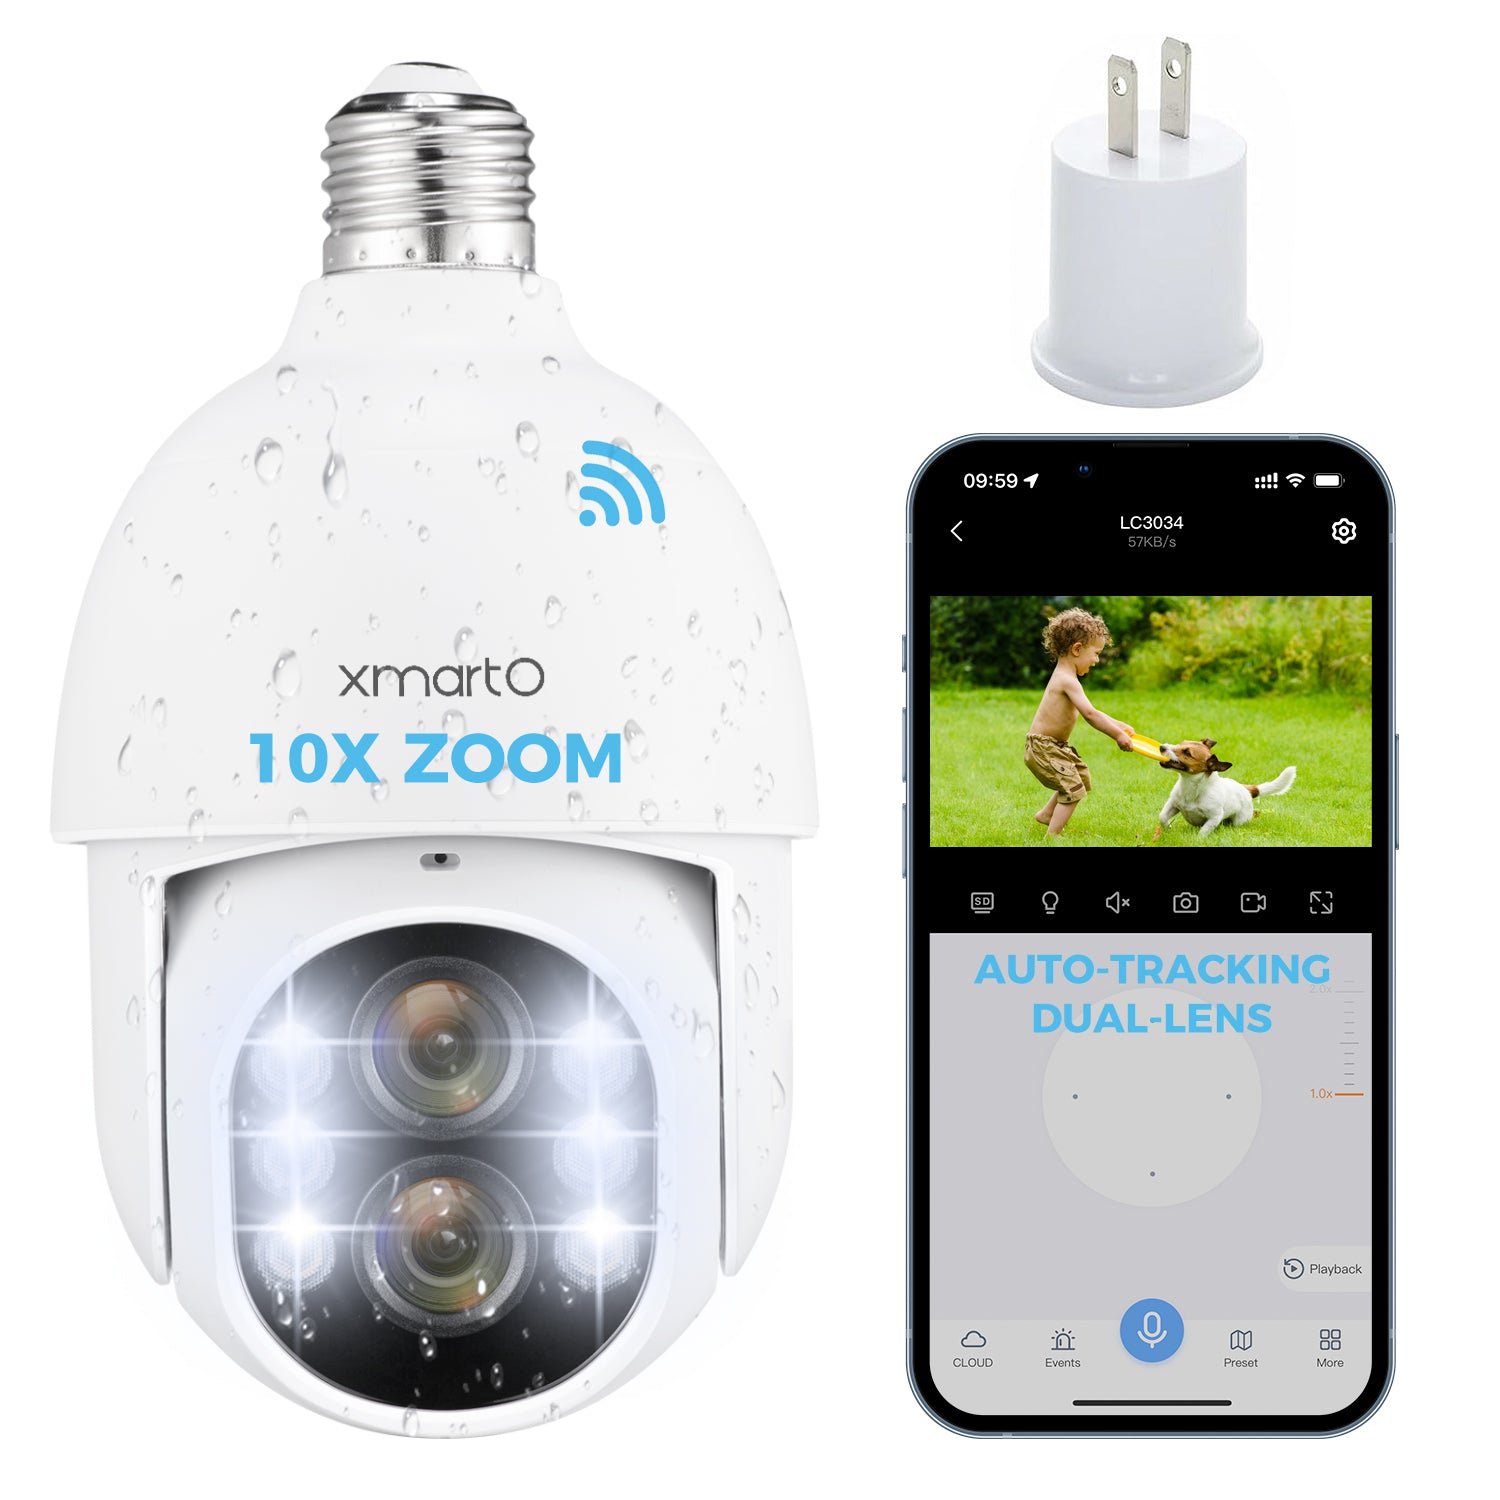 xmartO Light Bulb Security Camera Wireless Outdoor with Dual-Lens